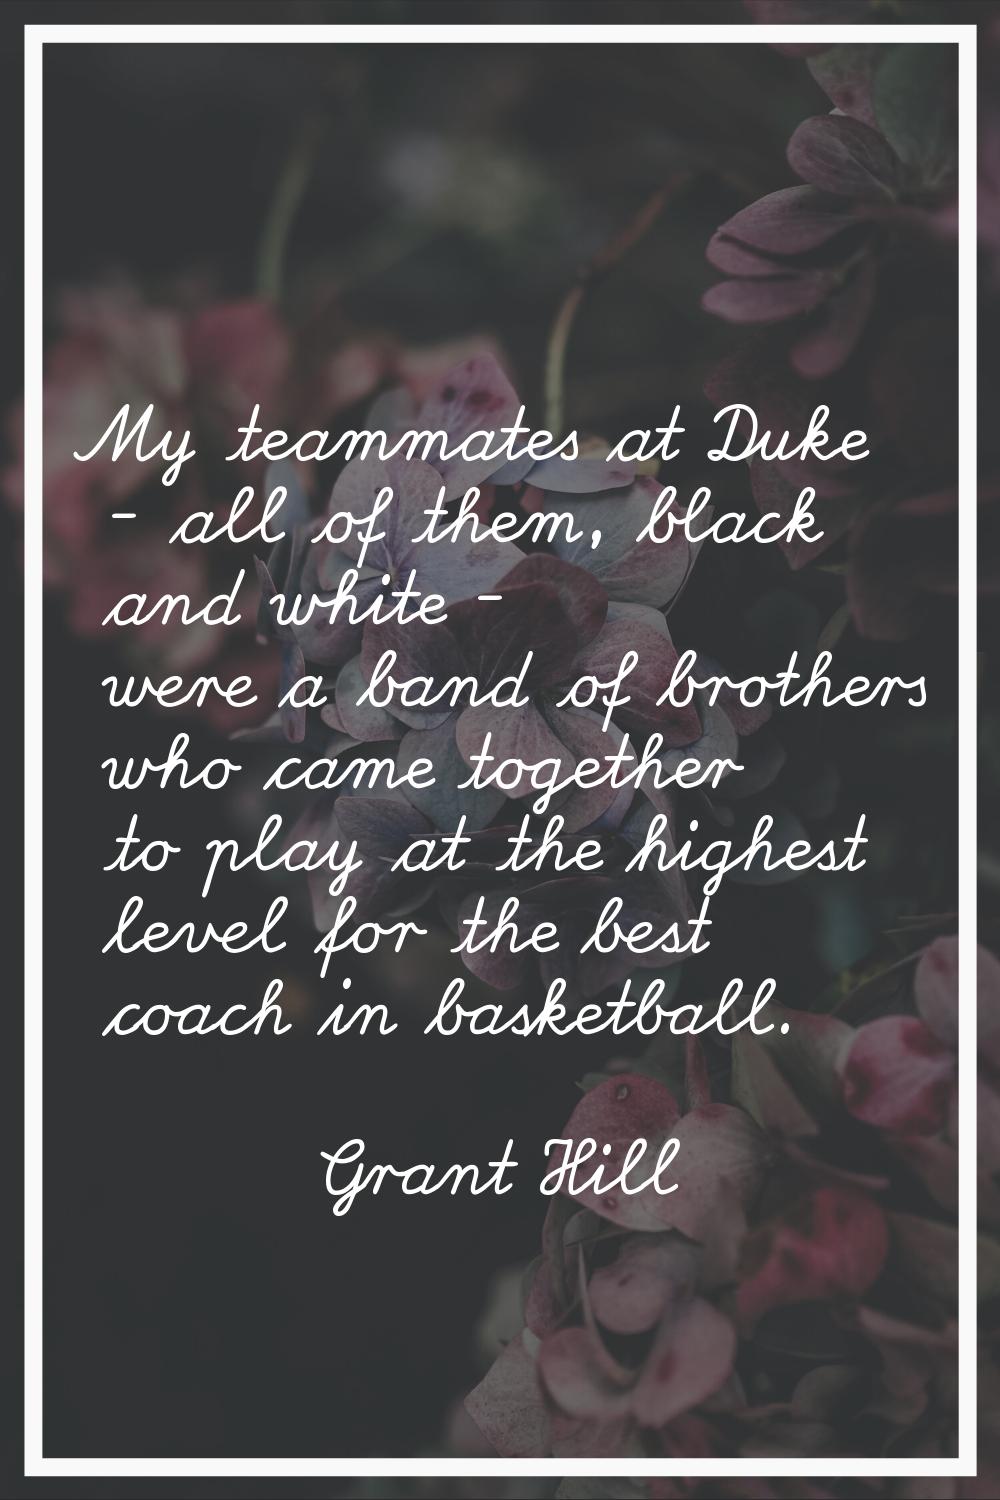 My teammates at Duke - all of them, black and white - were a band of brothers who came together to 